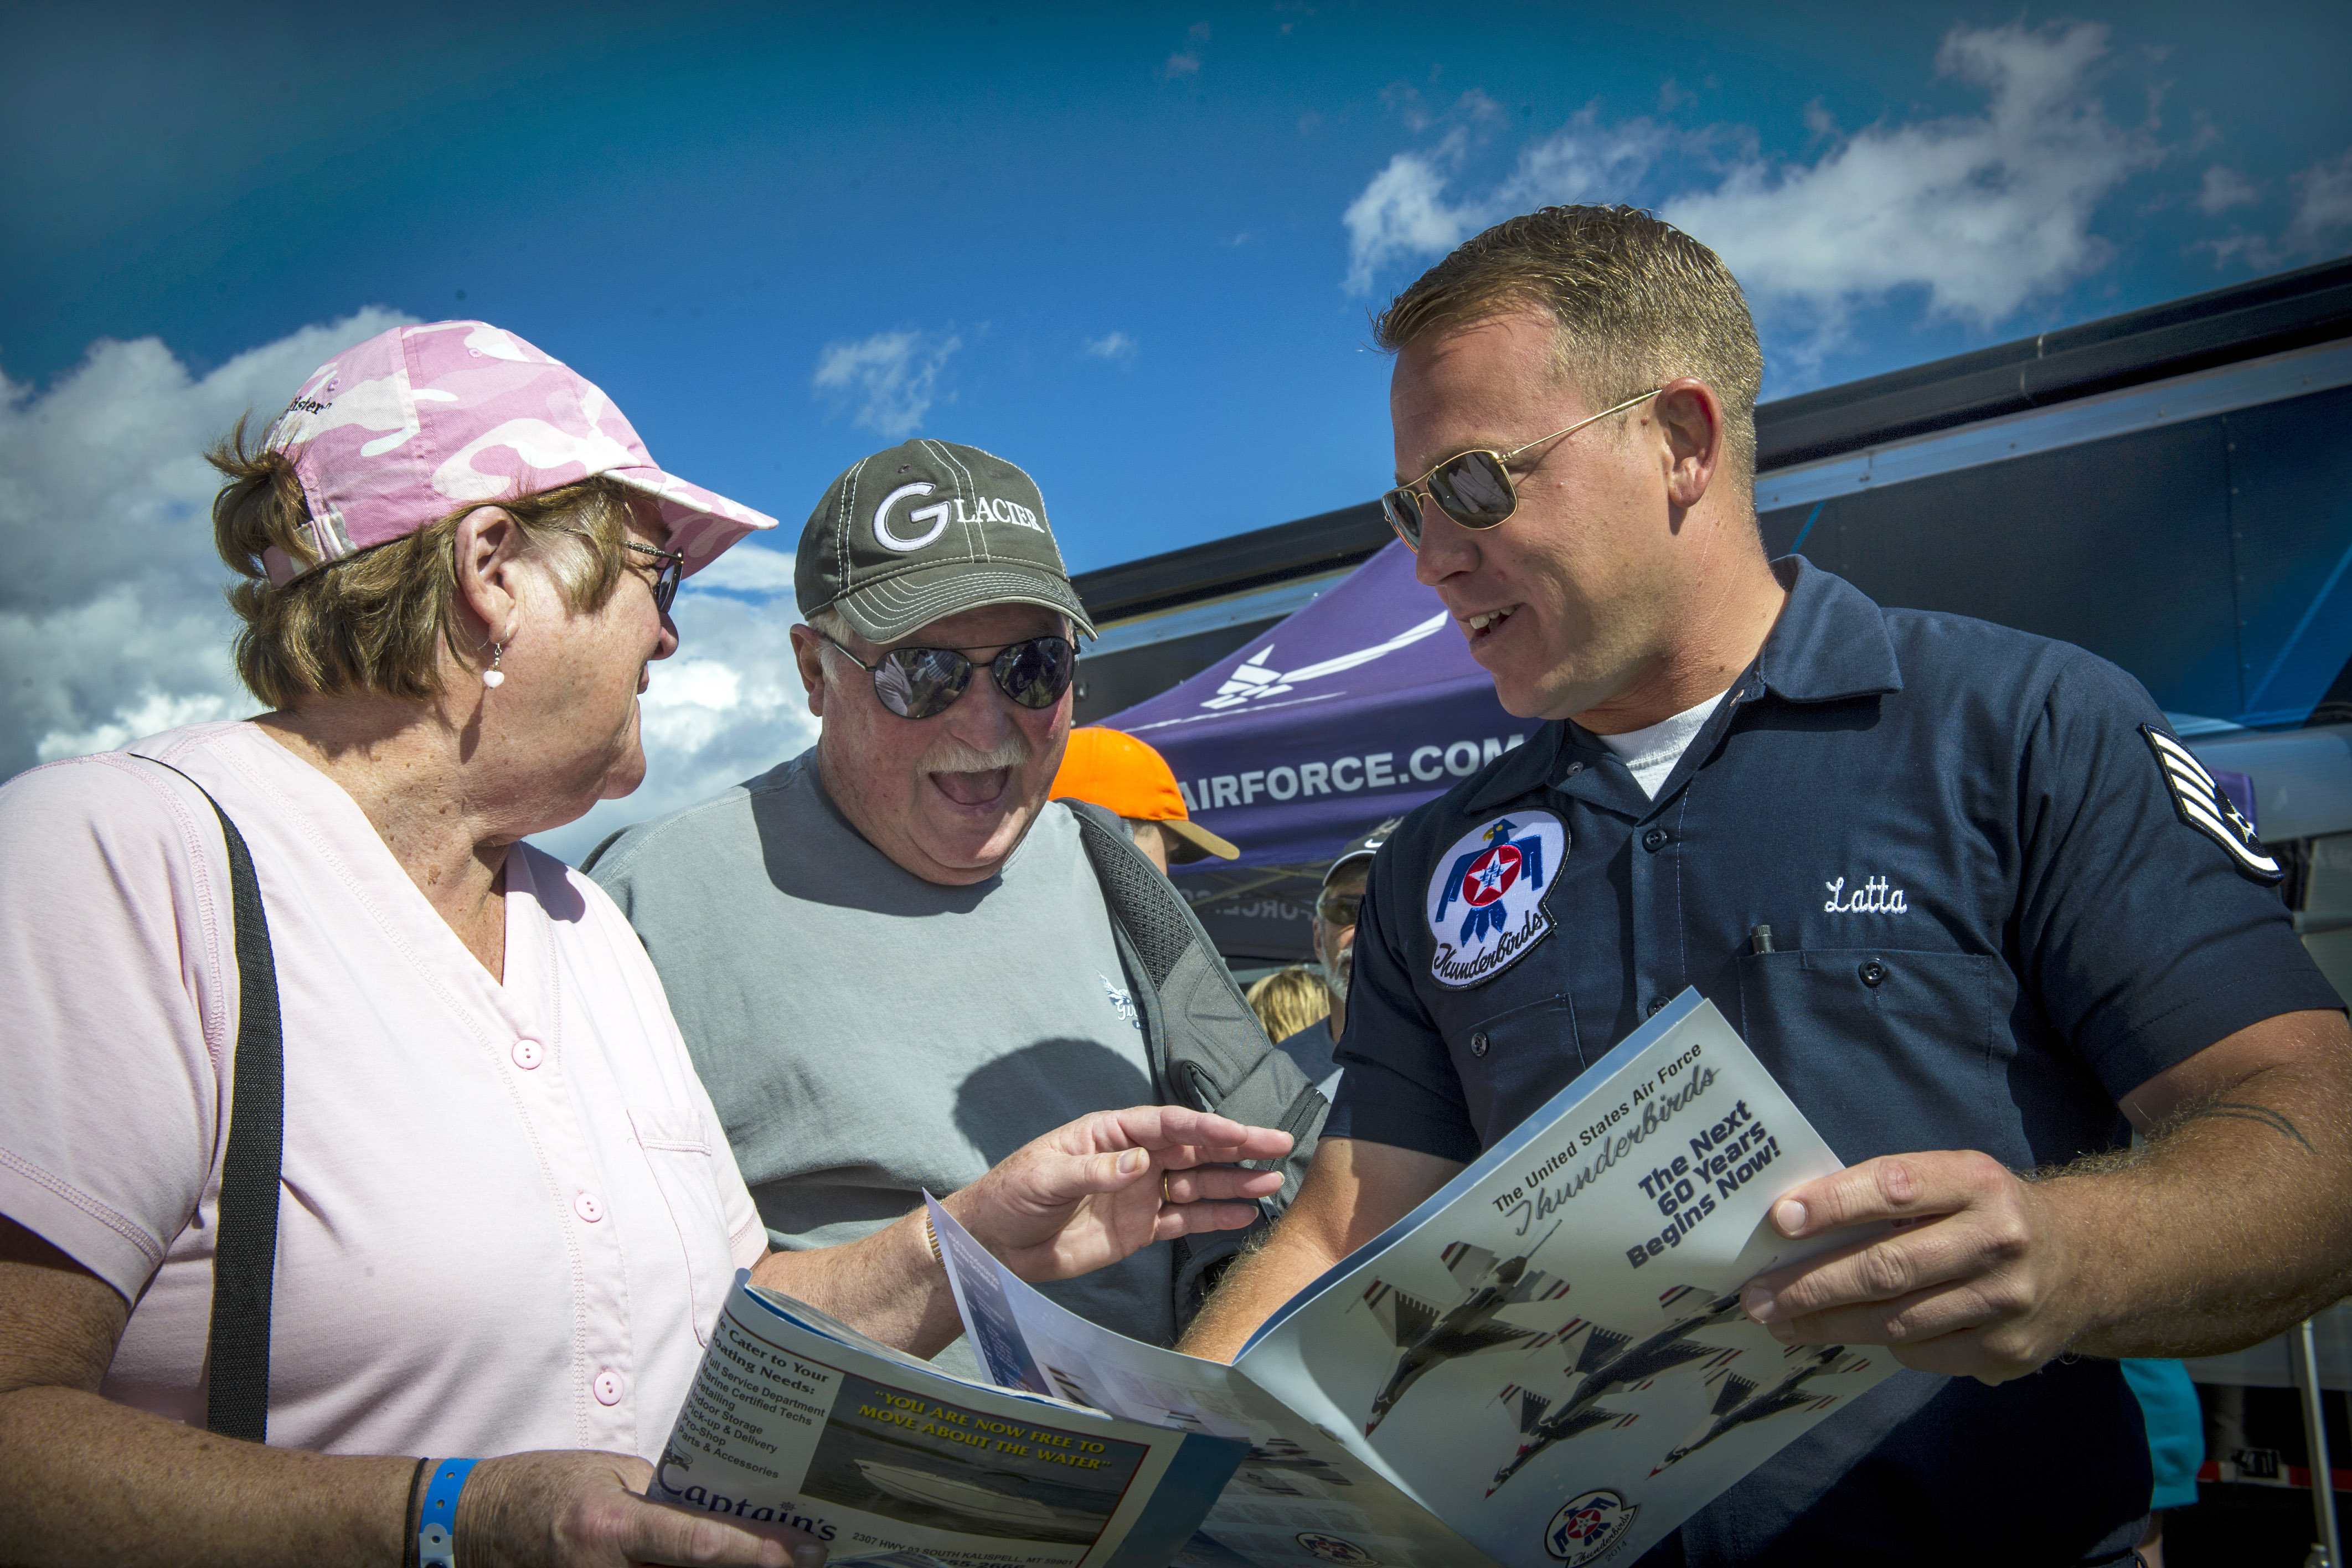 Air Force Staff Sgt. Adam Latta, right, speaks with fans during the ...